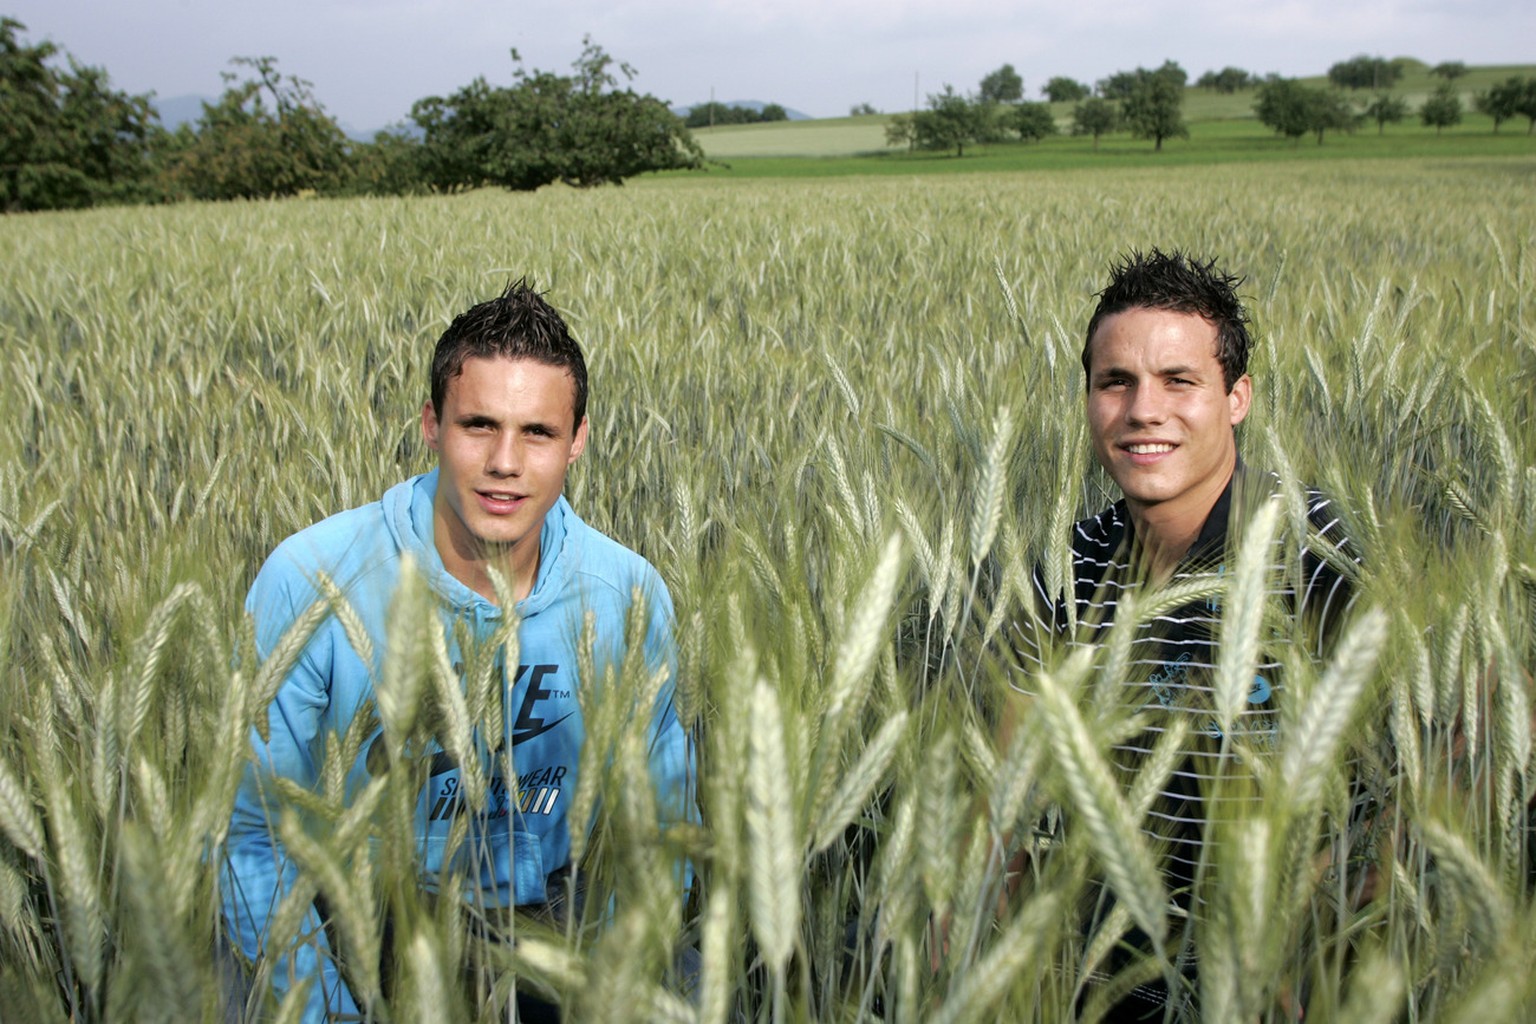 Portrait of the twins and Swiss football players David, left, and Philipp Degen, right, at their place of origin in Lampenberg in the canton of Basel-Land, Switzerland, pictured on June 6, 2007. Phili ...